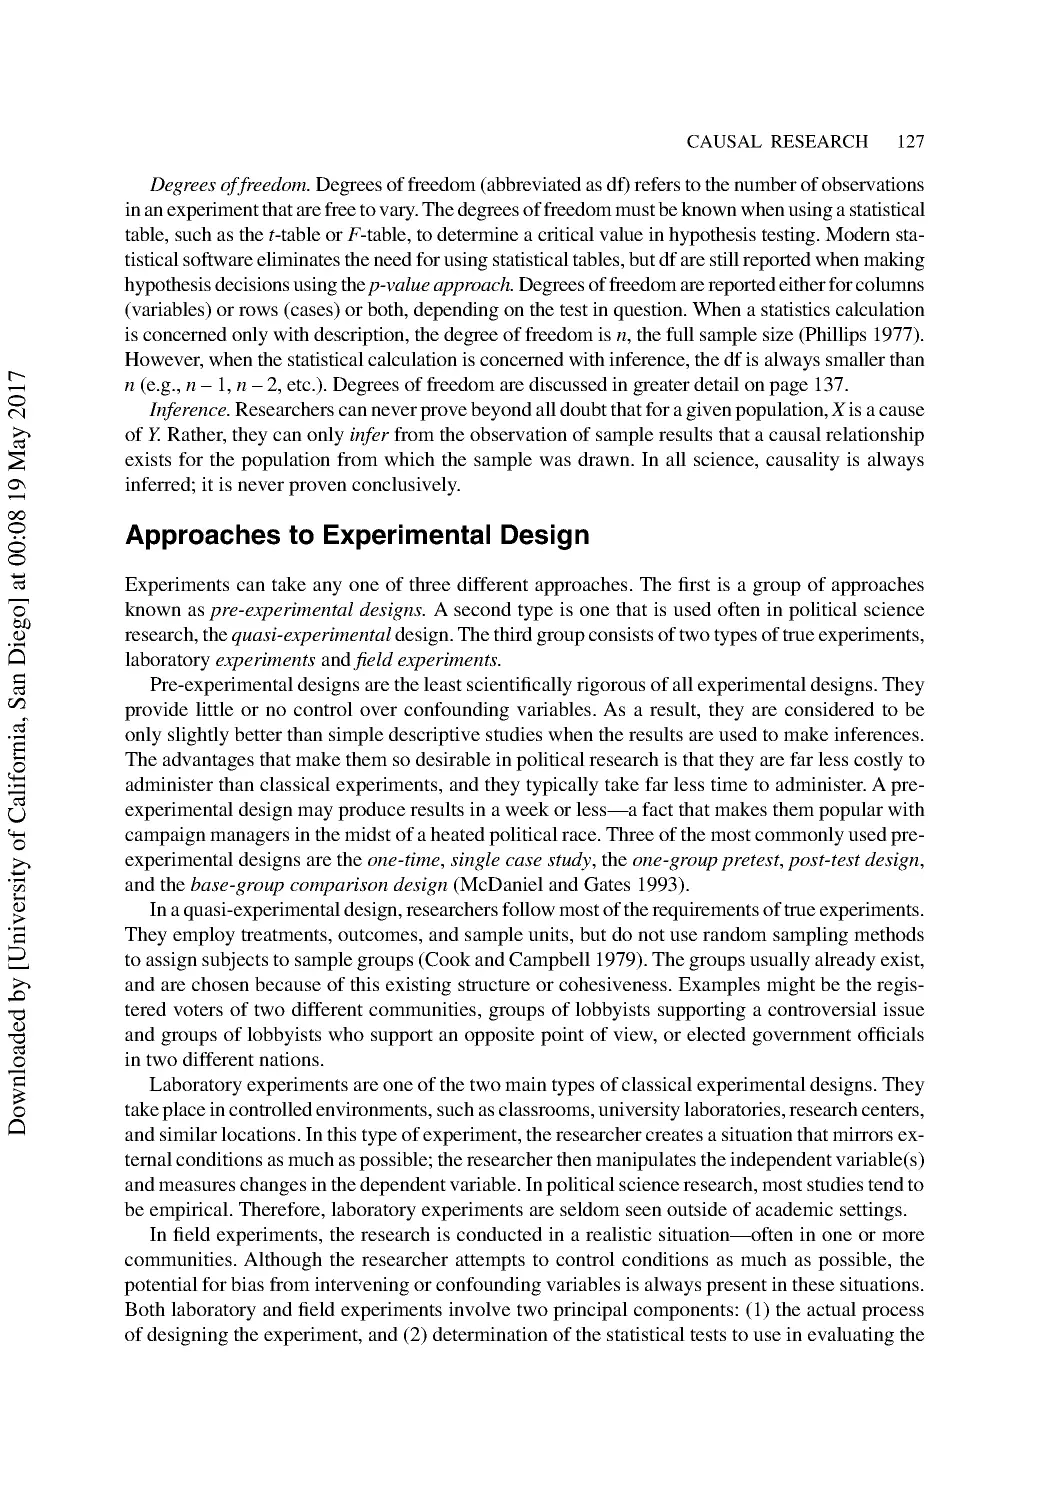 Approaches to Experimental Design